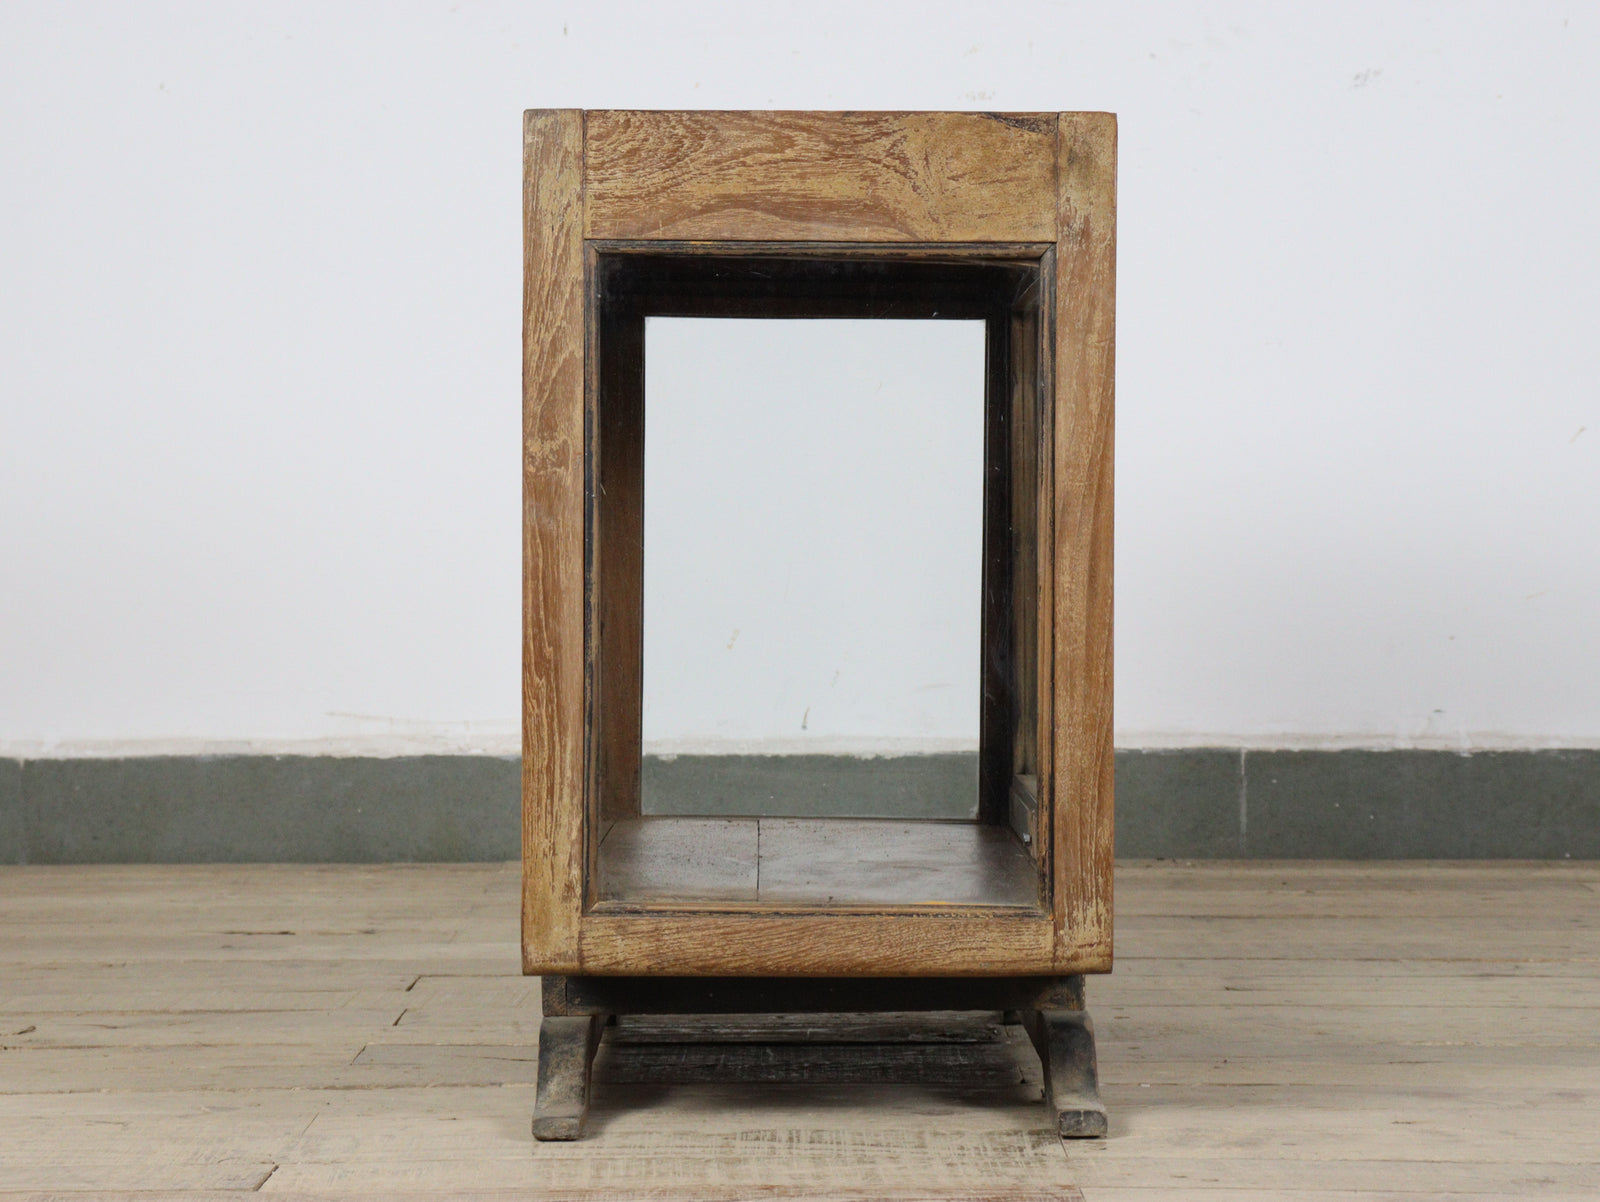 MILL-1878/20 Small Cabinet C26